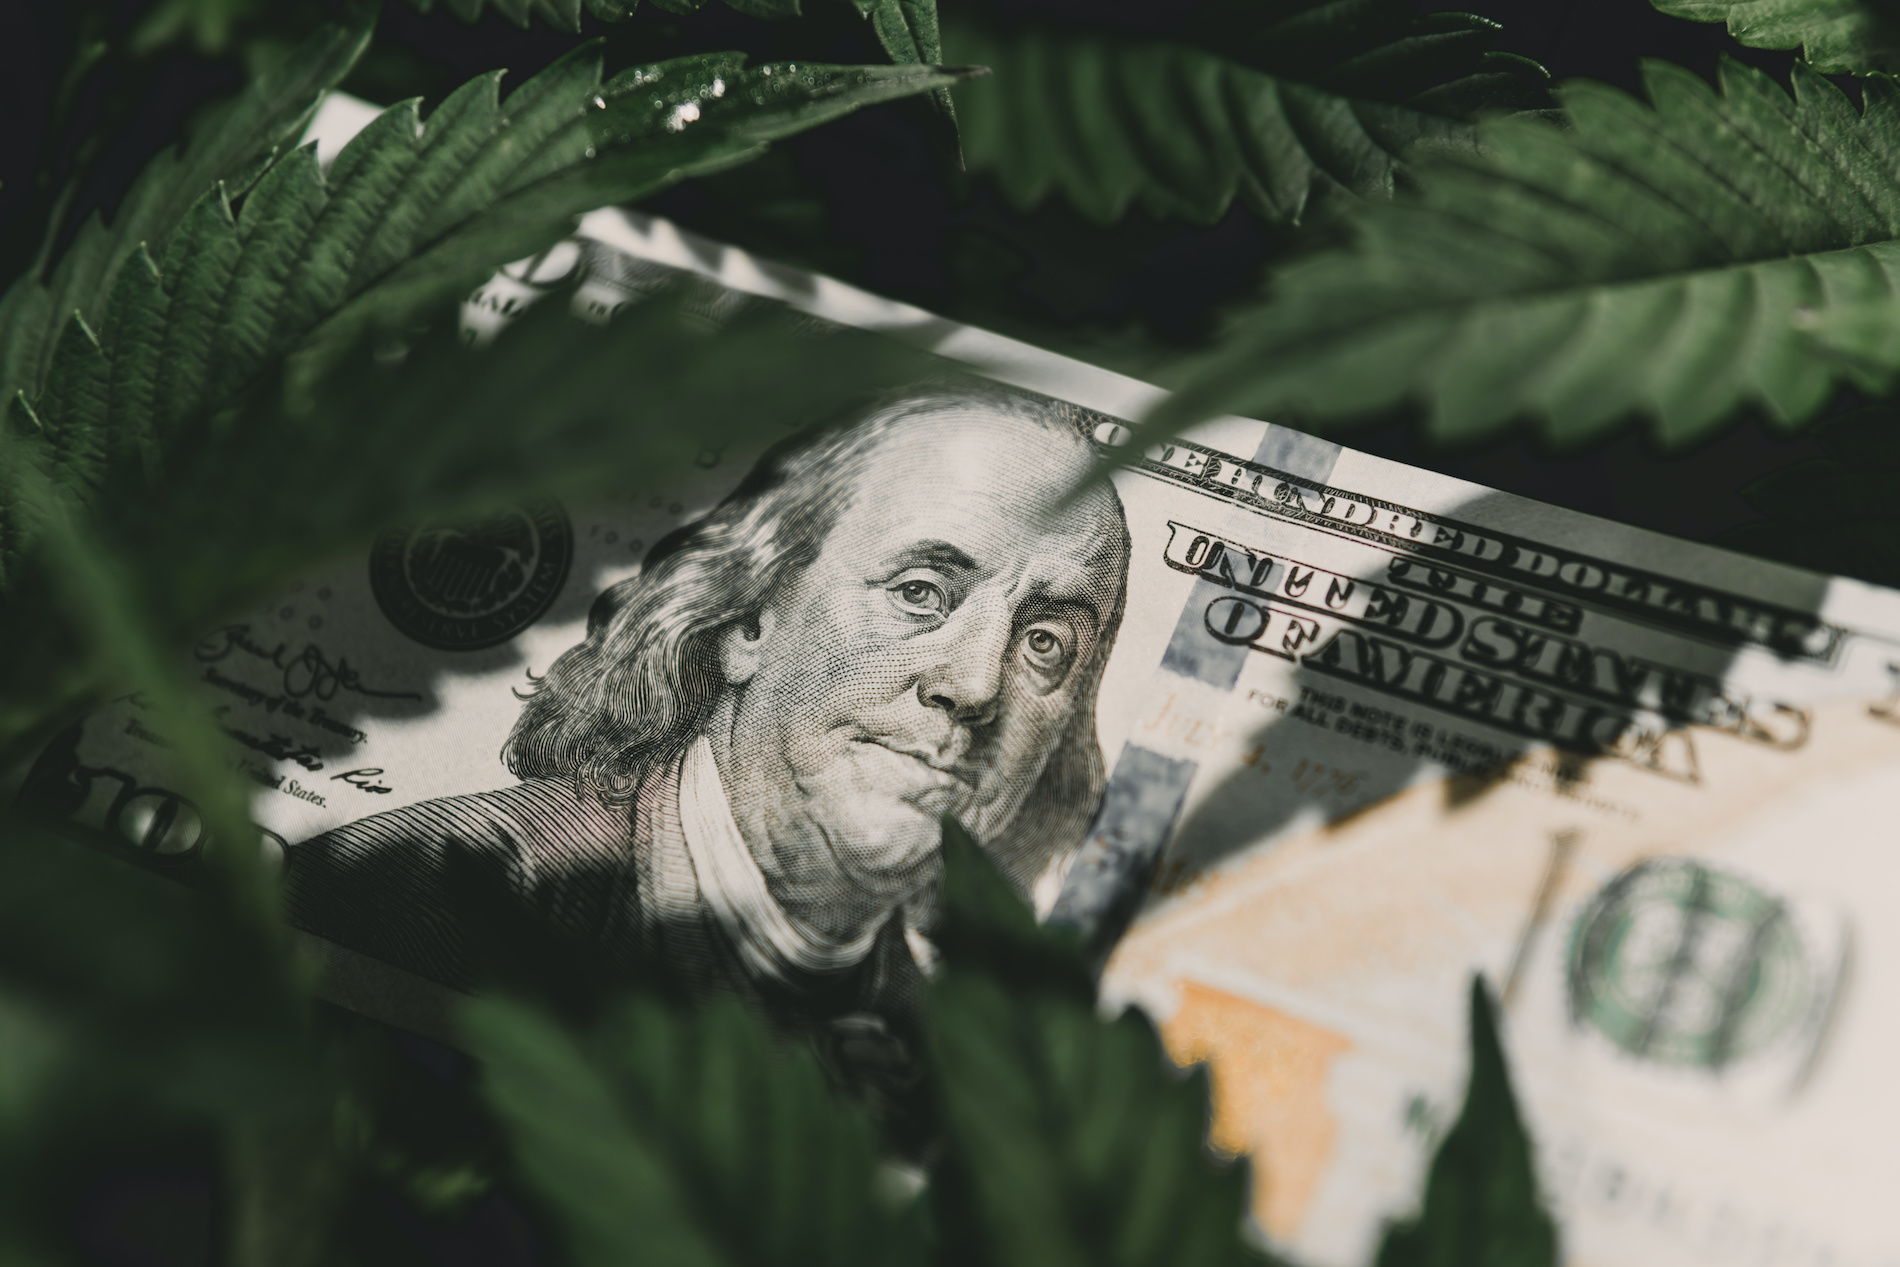 Consumer demand for cannabis products during inflation